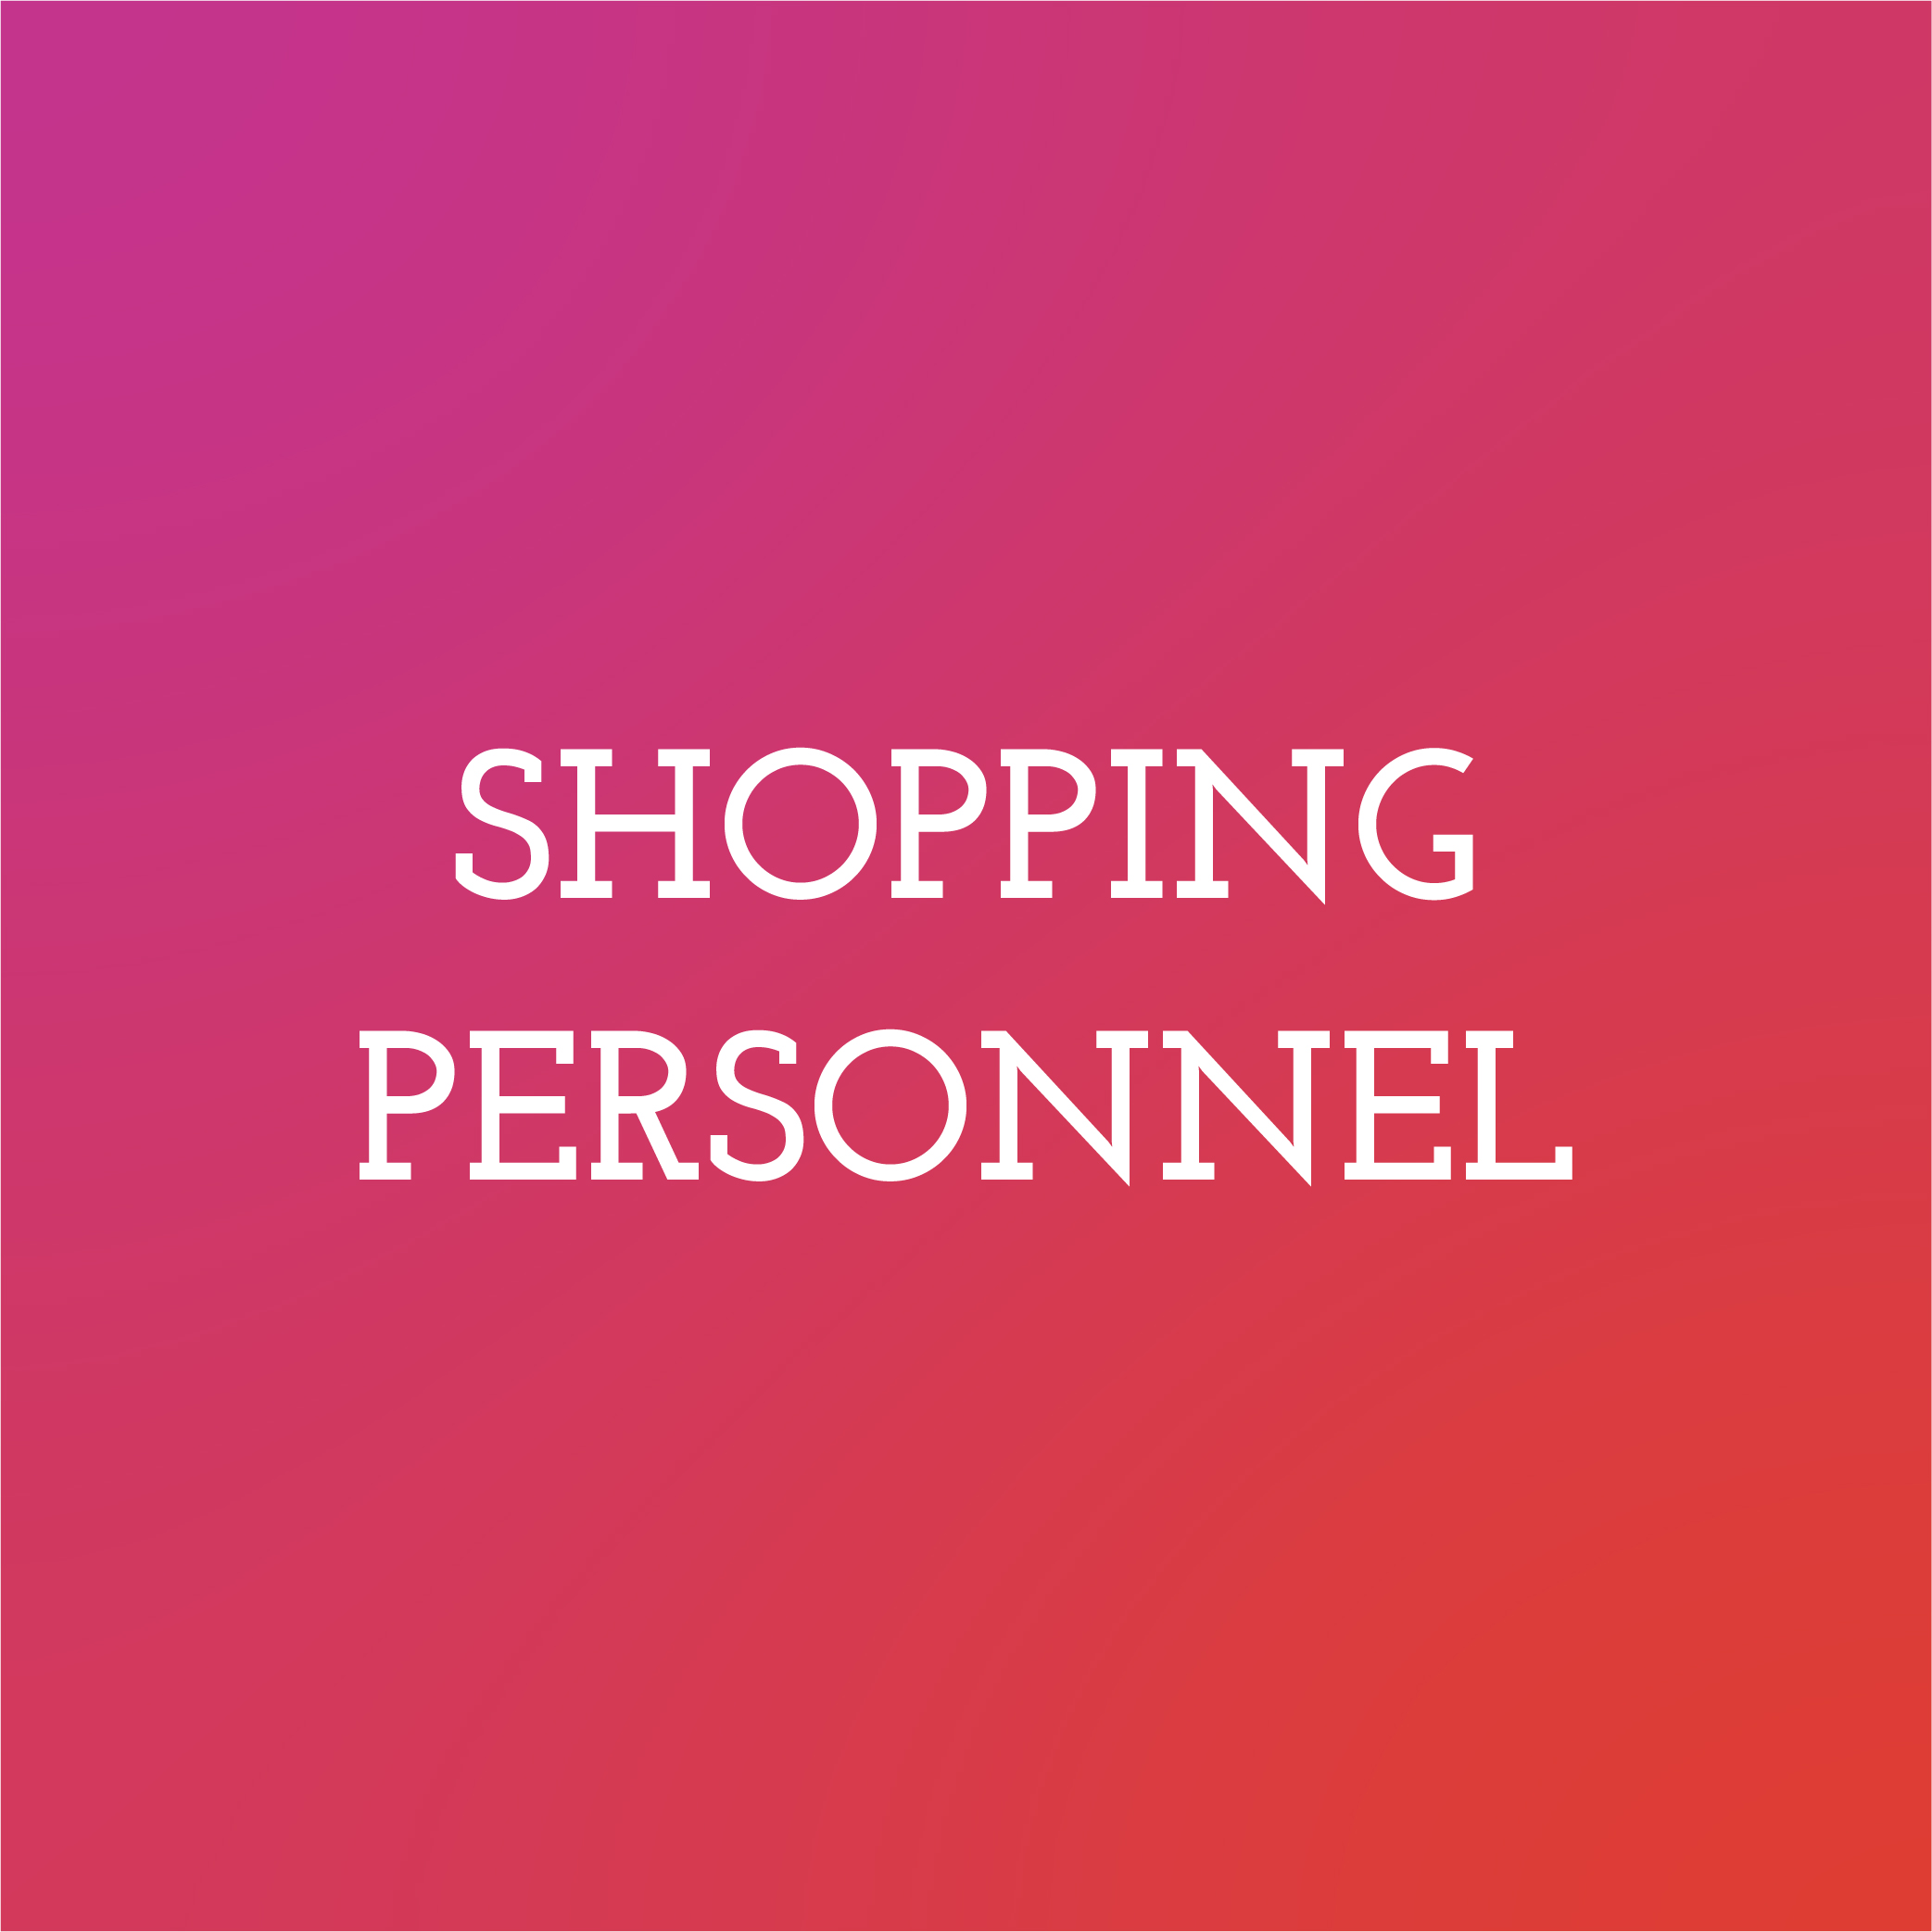 Shopping personnel